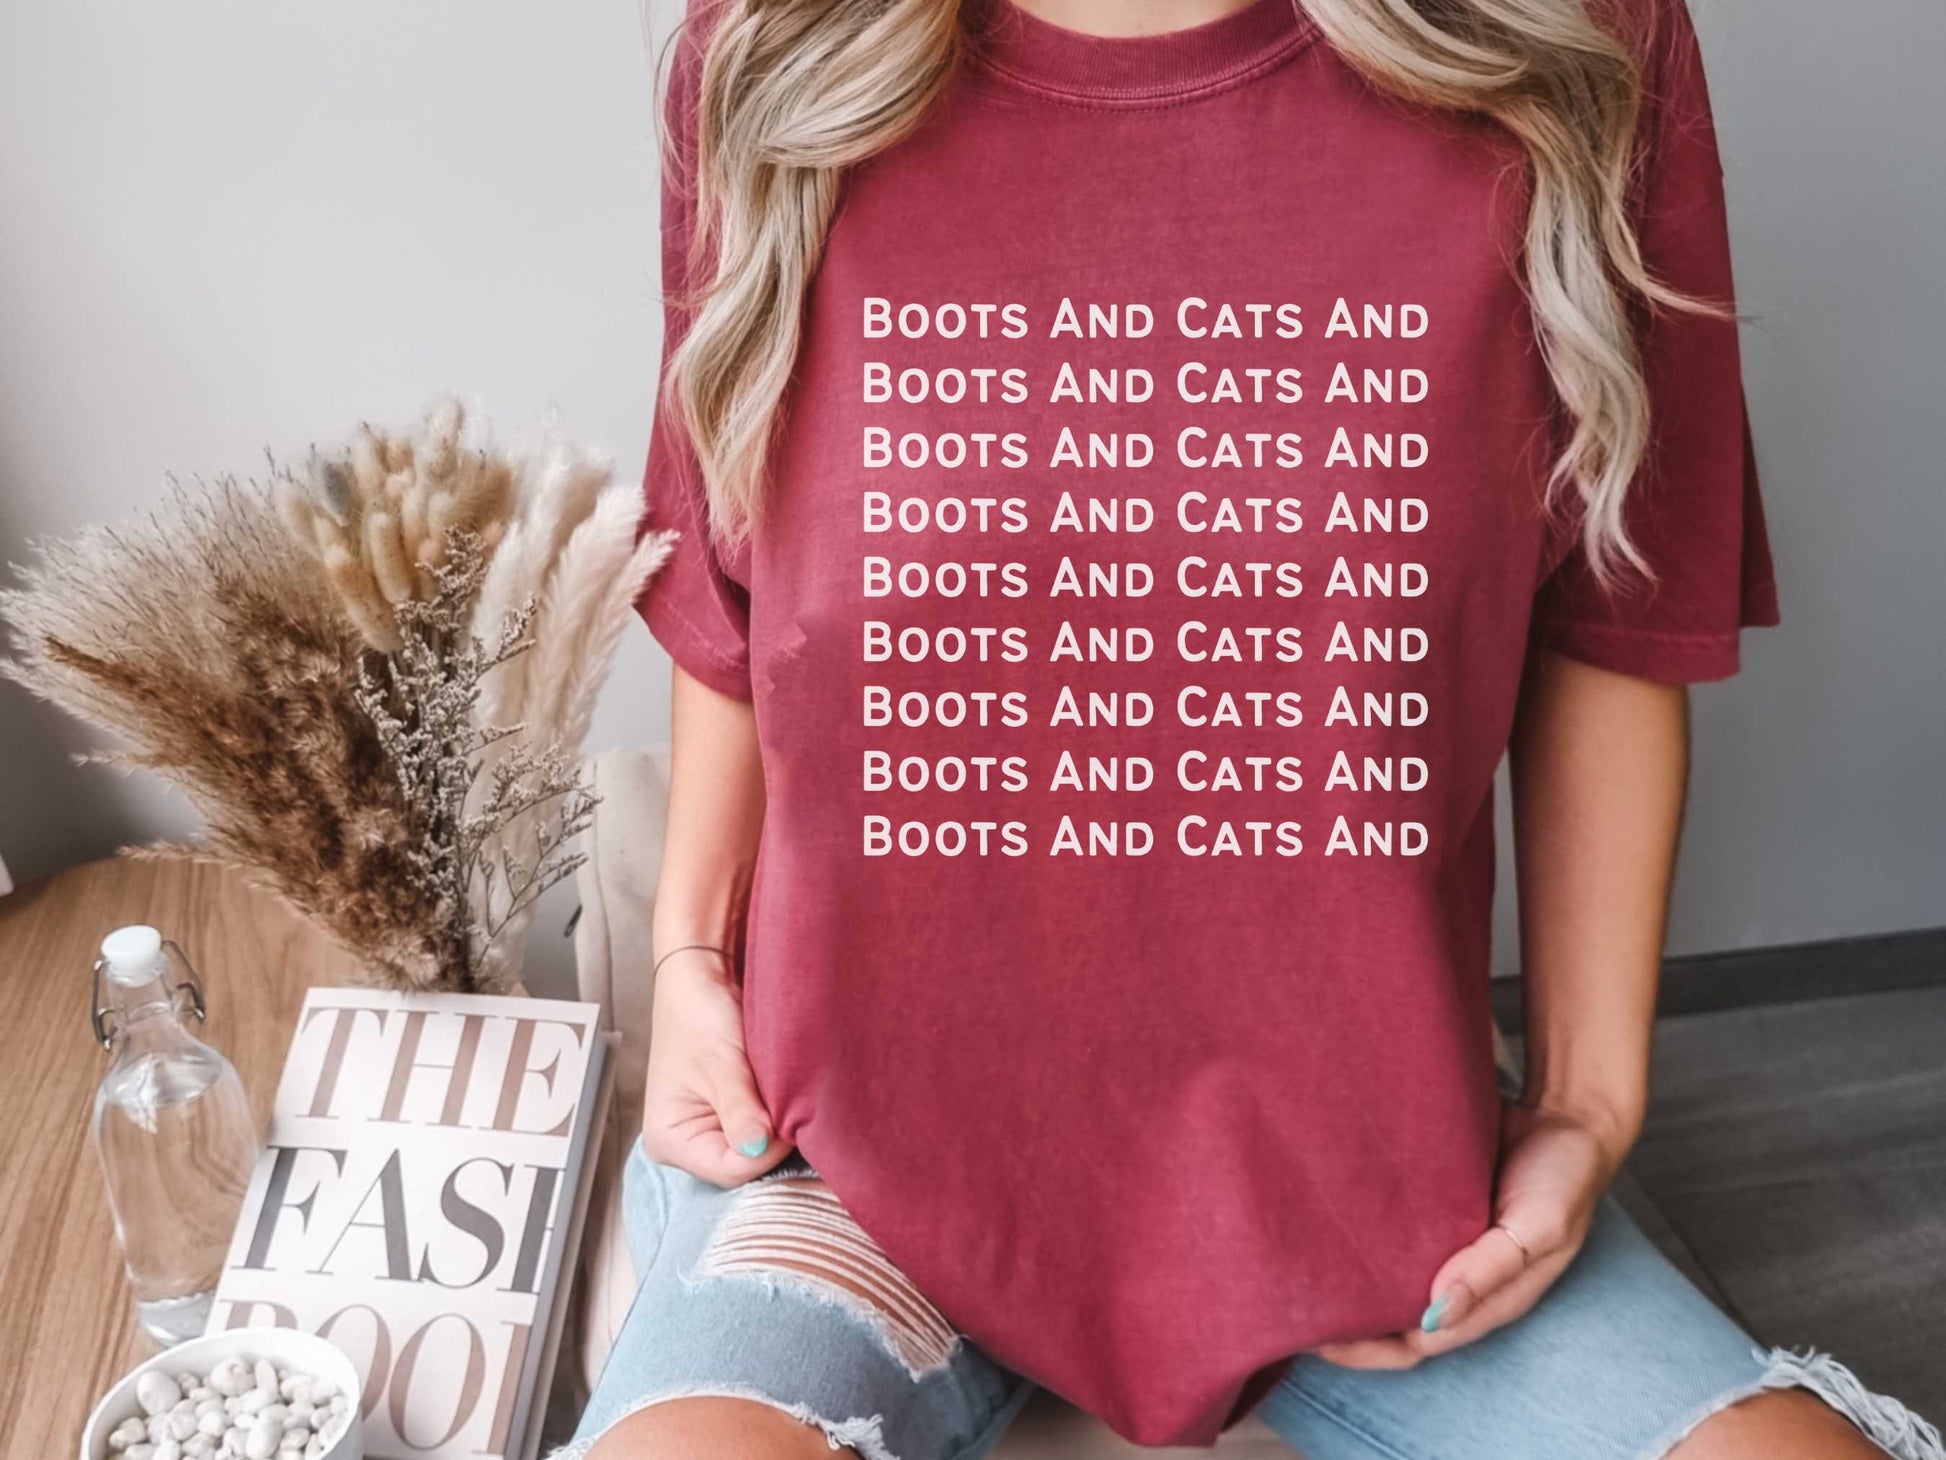 Funny Beatboxing "Boots And Cats" T-Shirt in Brick